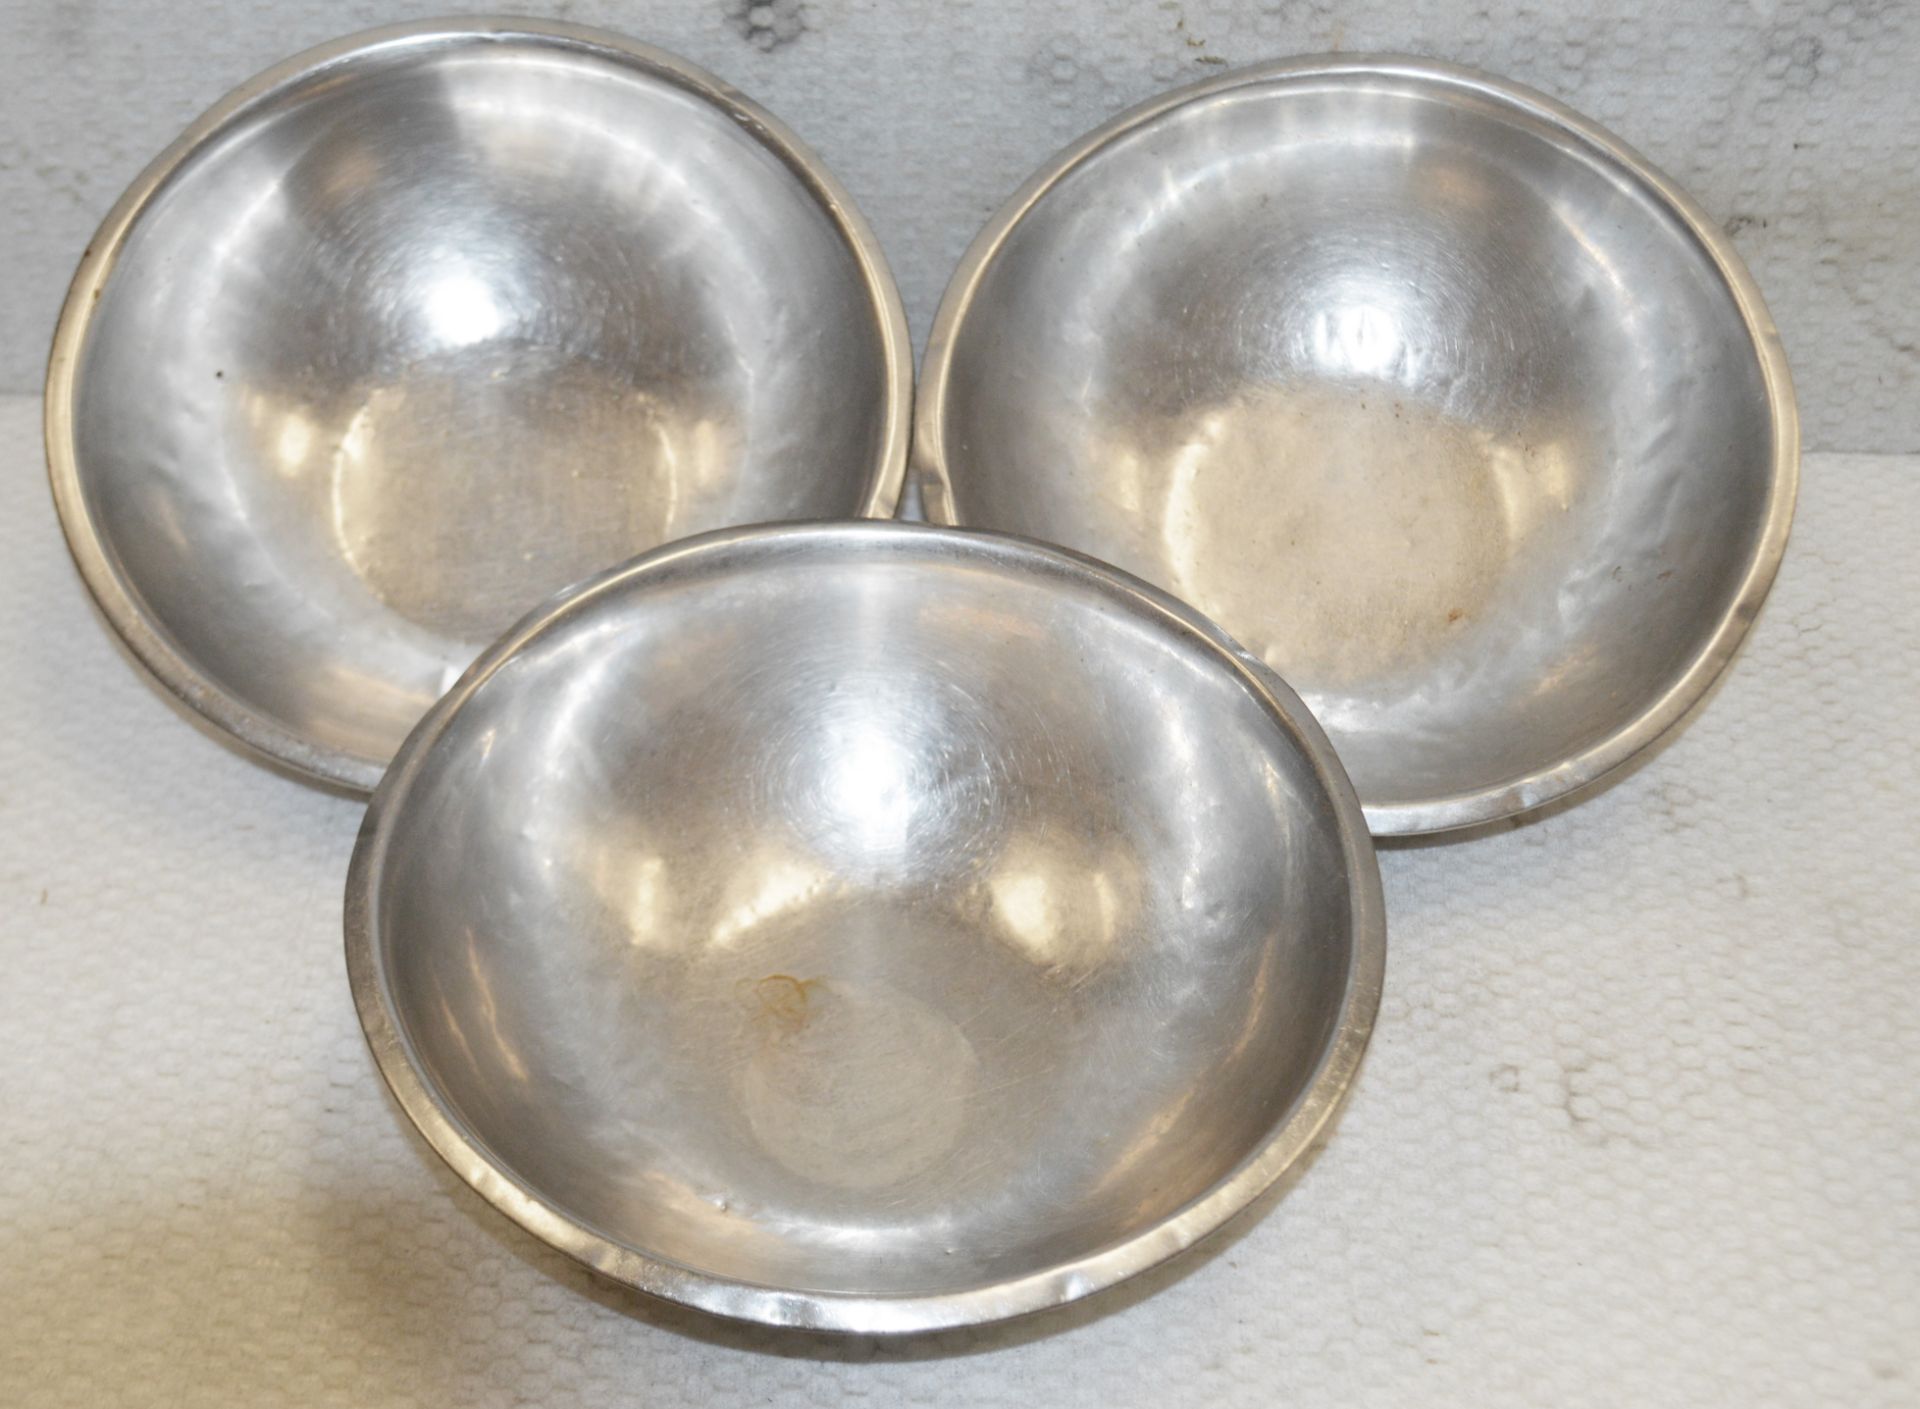 19 x Stainless Steel Mixing  Bowls For Commercial Kitchens - Includes Small, Medium and Large - Image 5 of 6